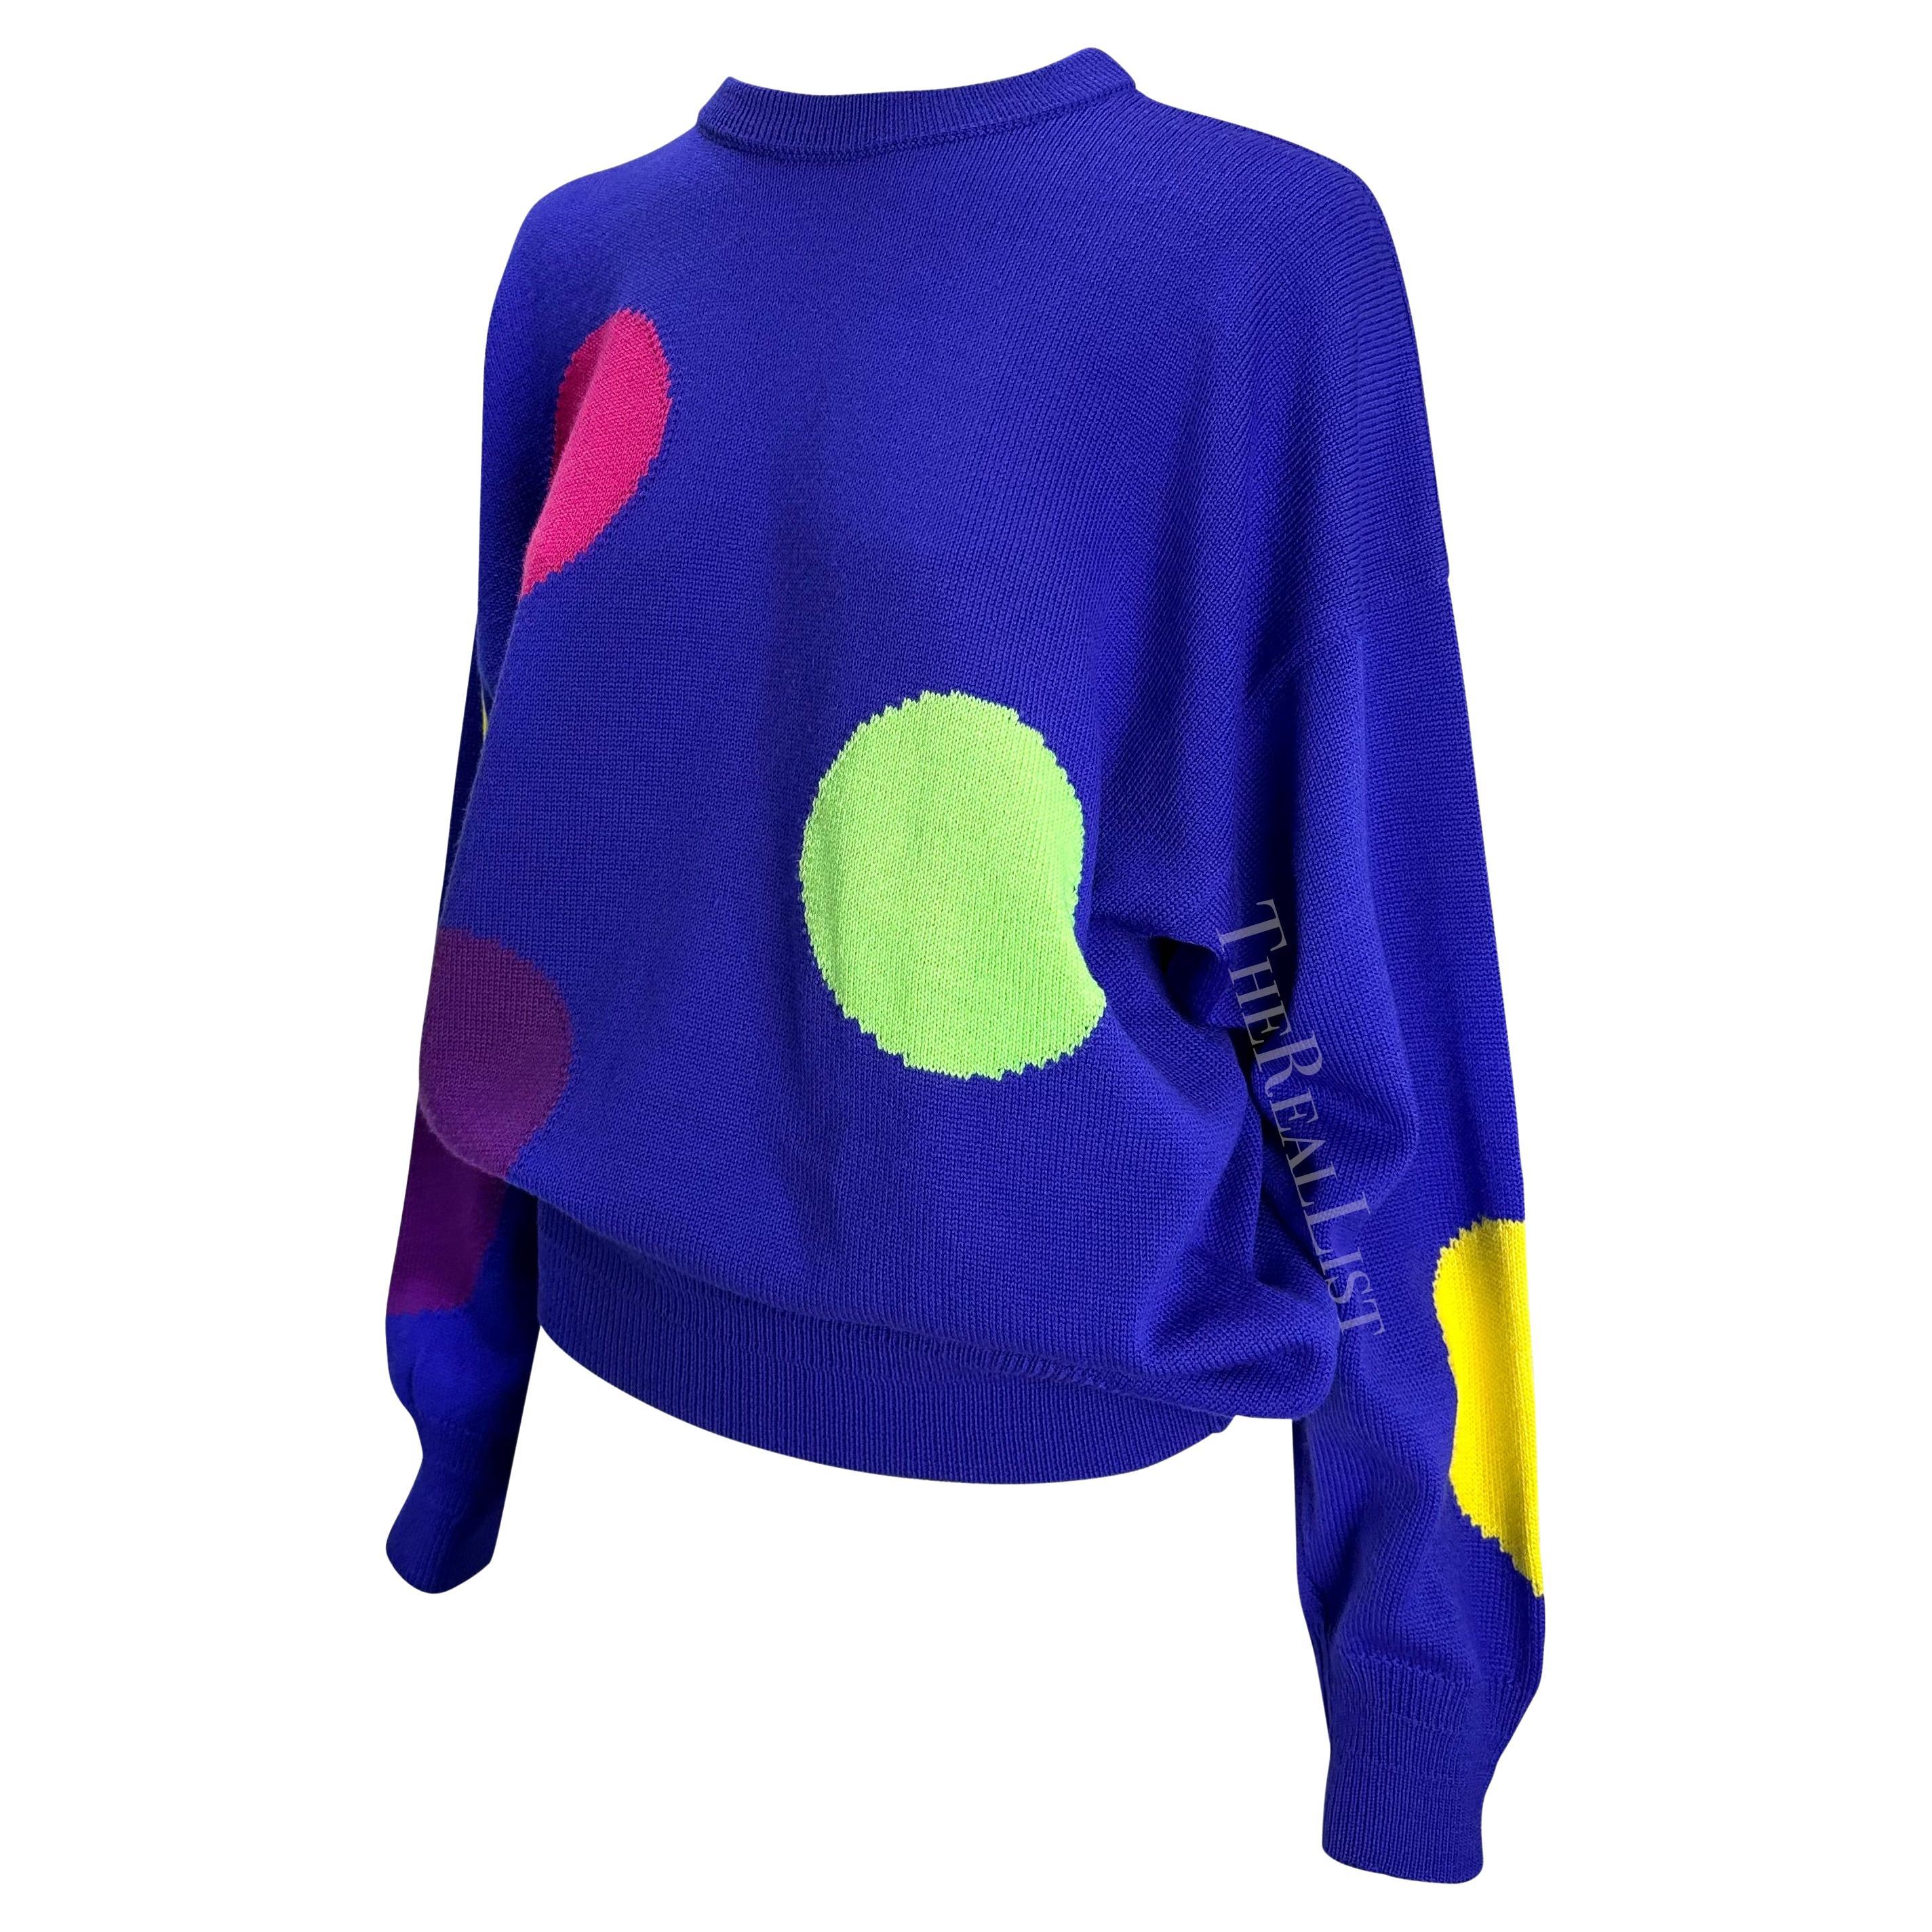 TheRealList presents: a vibrant blue Gianni Versace polka dot sweater, designed by Gianni Versace. From the Spring/Summer 1991 men's collection, this oversized sweater is covered in a number of large colored polka dots. 

Follow us on Instagram!